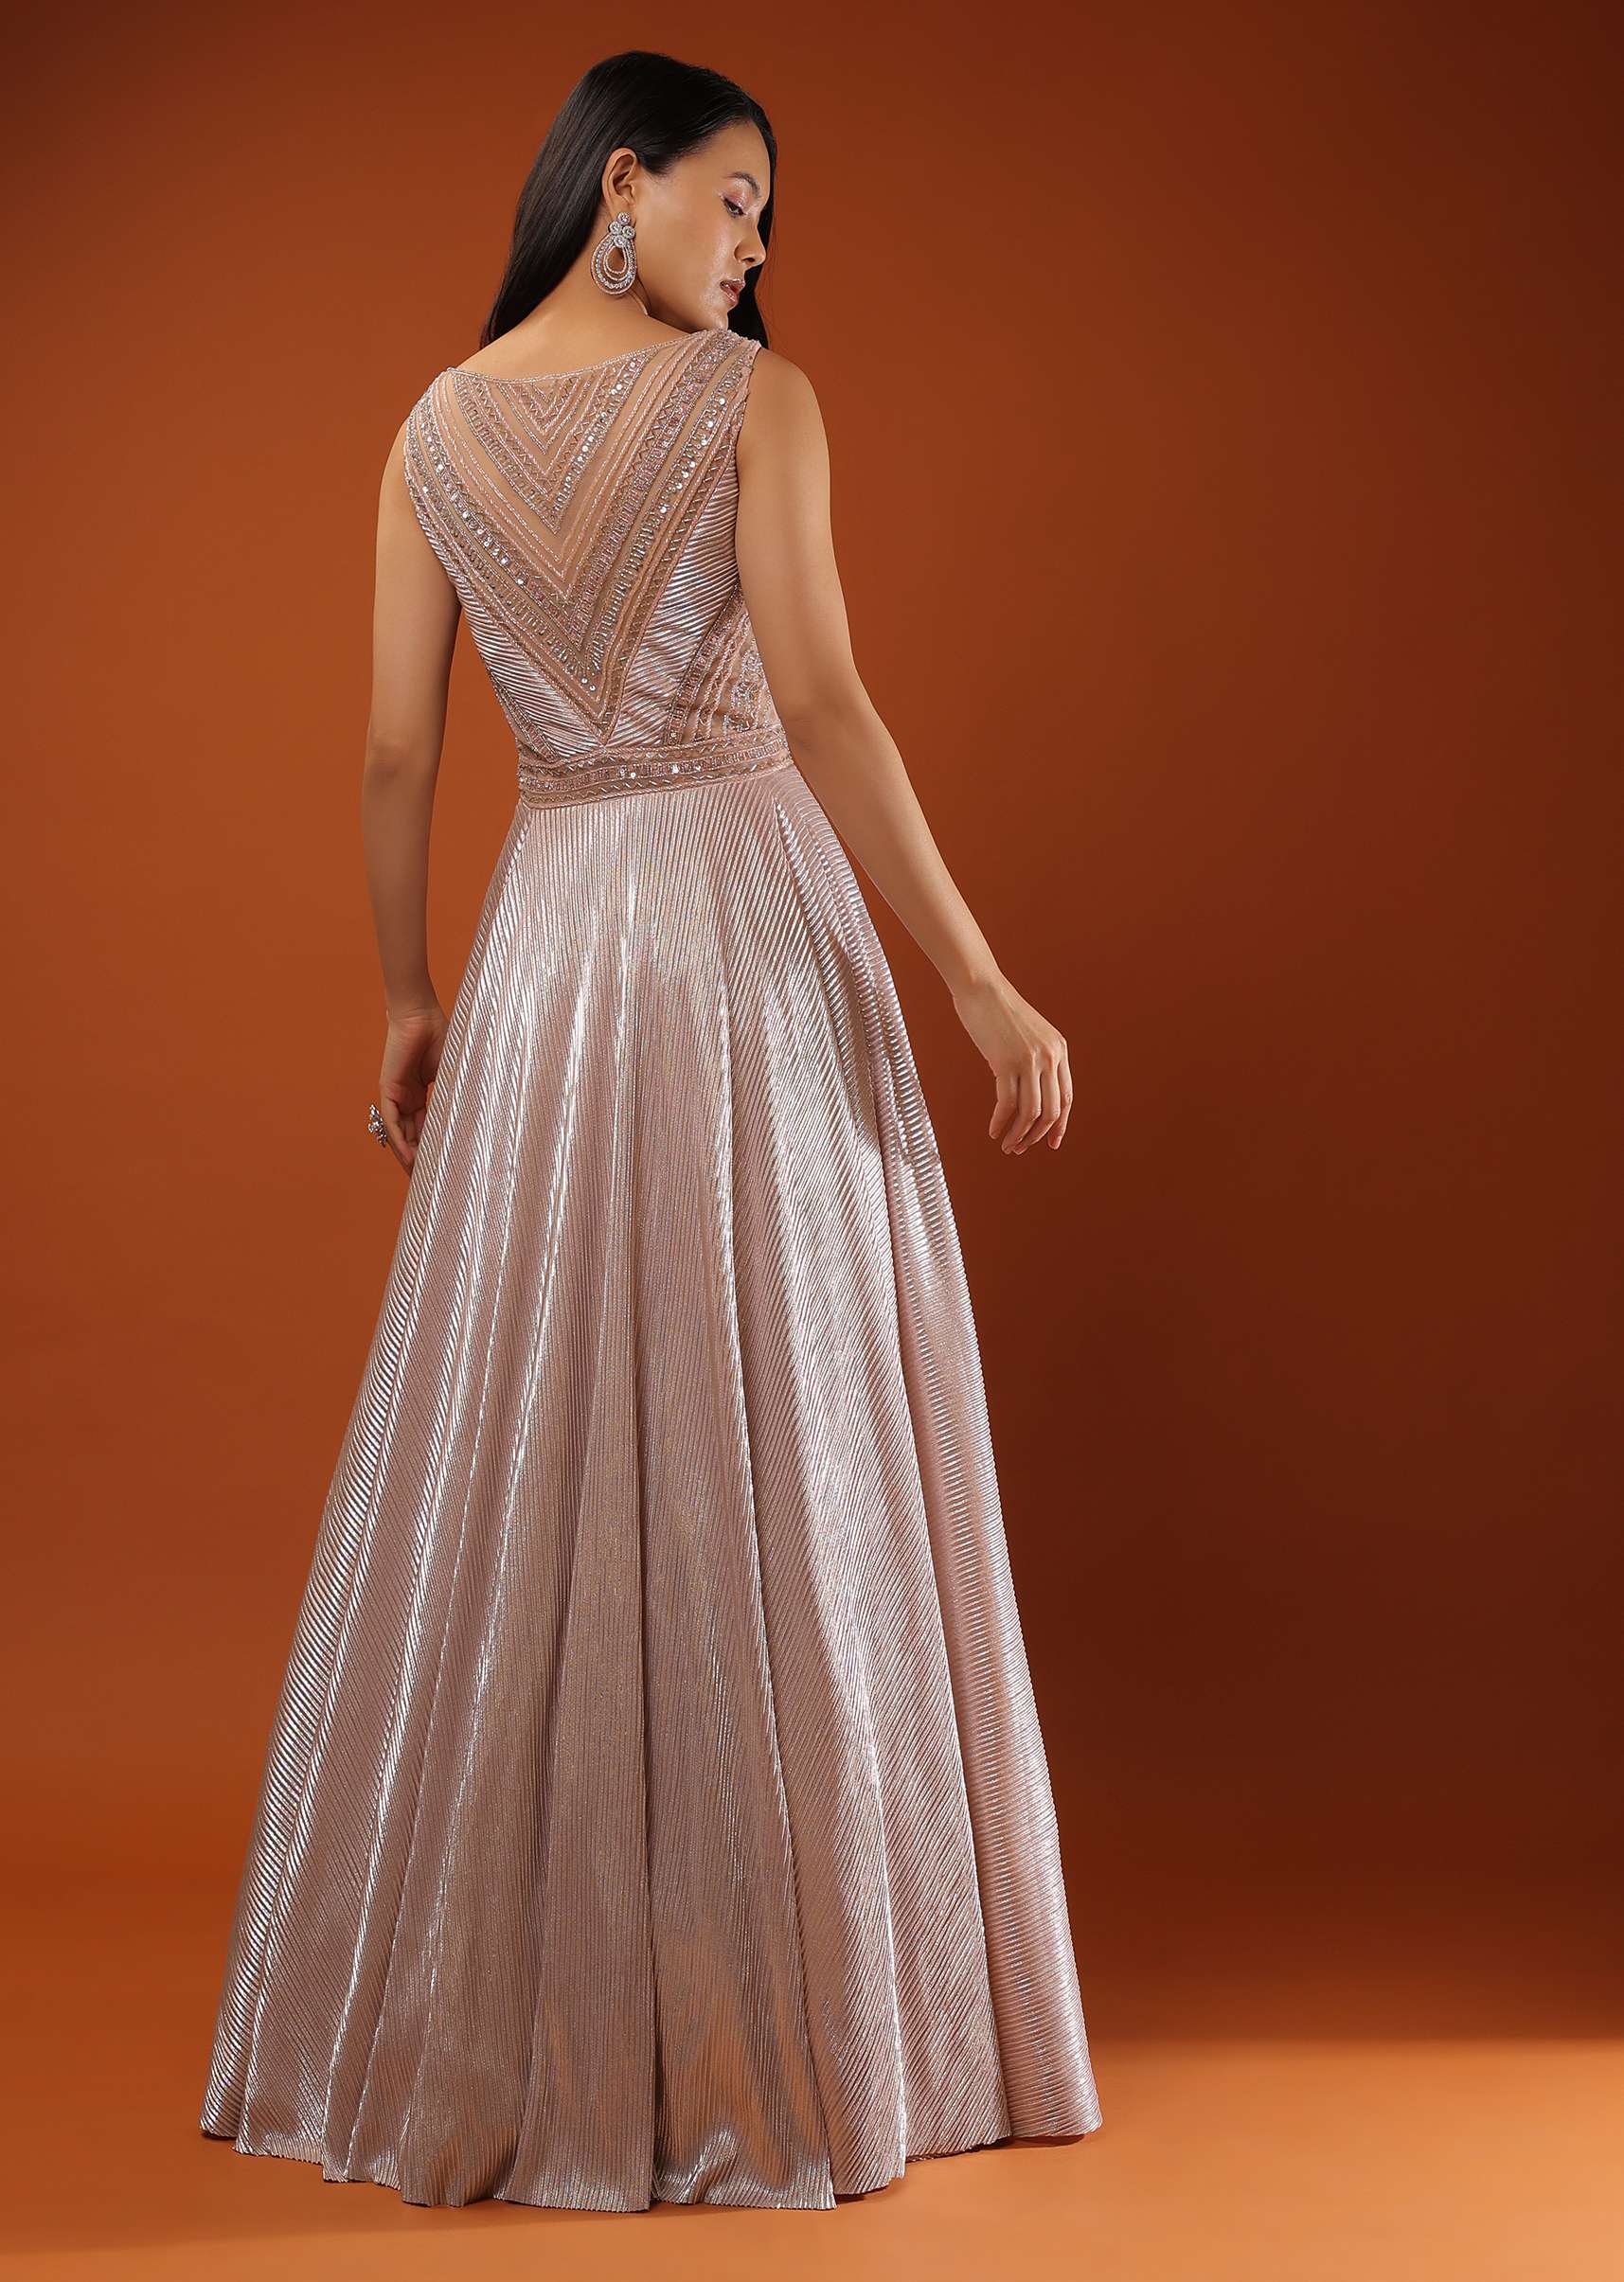 Shimmer Crush Gown In Sequins Embroidery, Sleeveless In A Boat Neckline